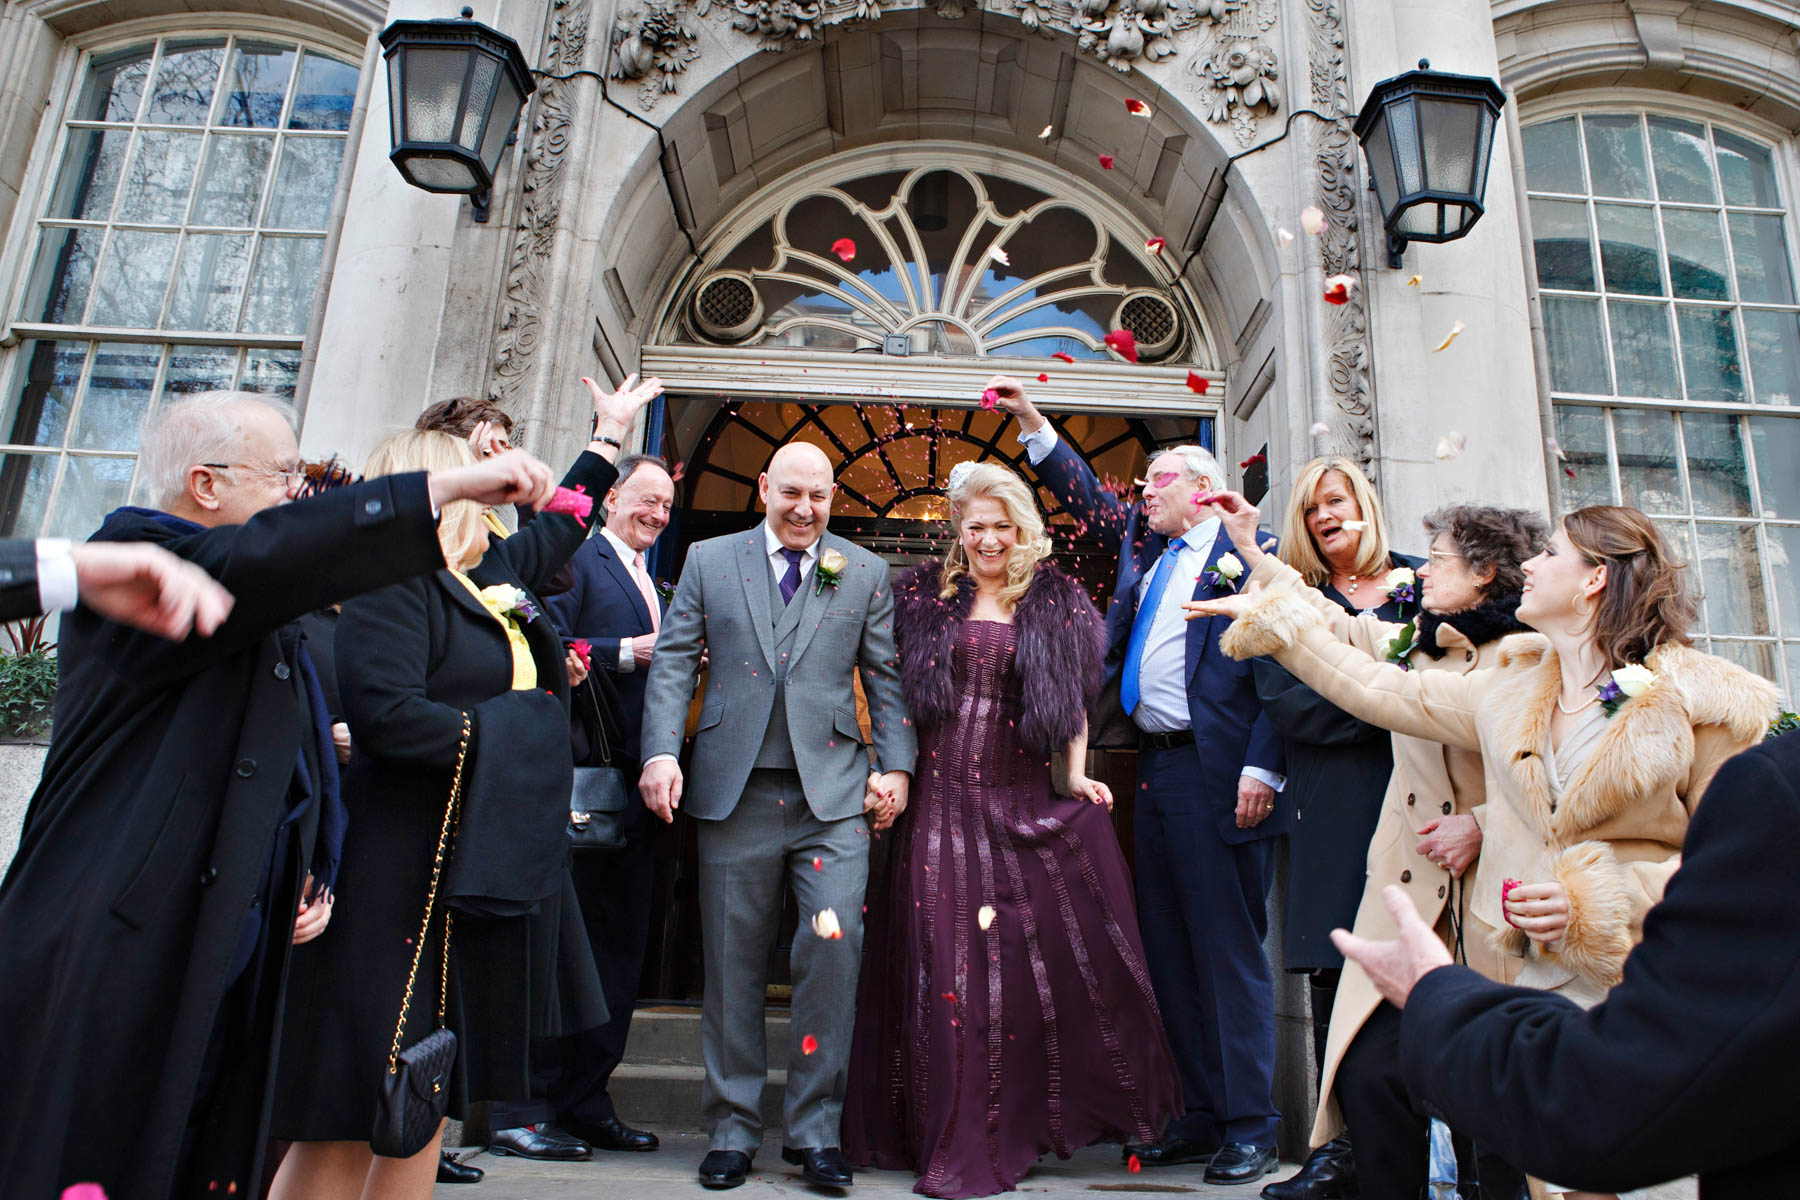 A mature bride and groom exit their wedding ceremony into lots of confetti thrown by their guests on the steps of Chelsea Old Town Hall. The bride is wearing a dark purple wedding dress.